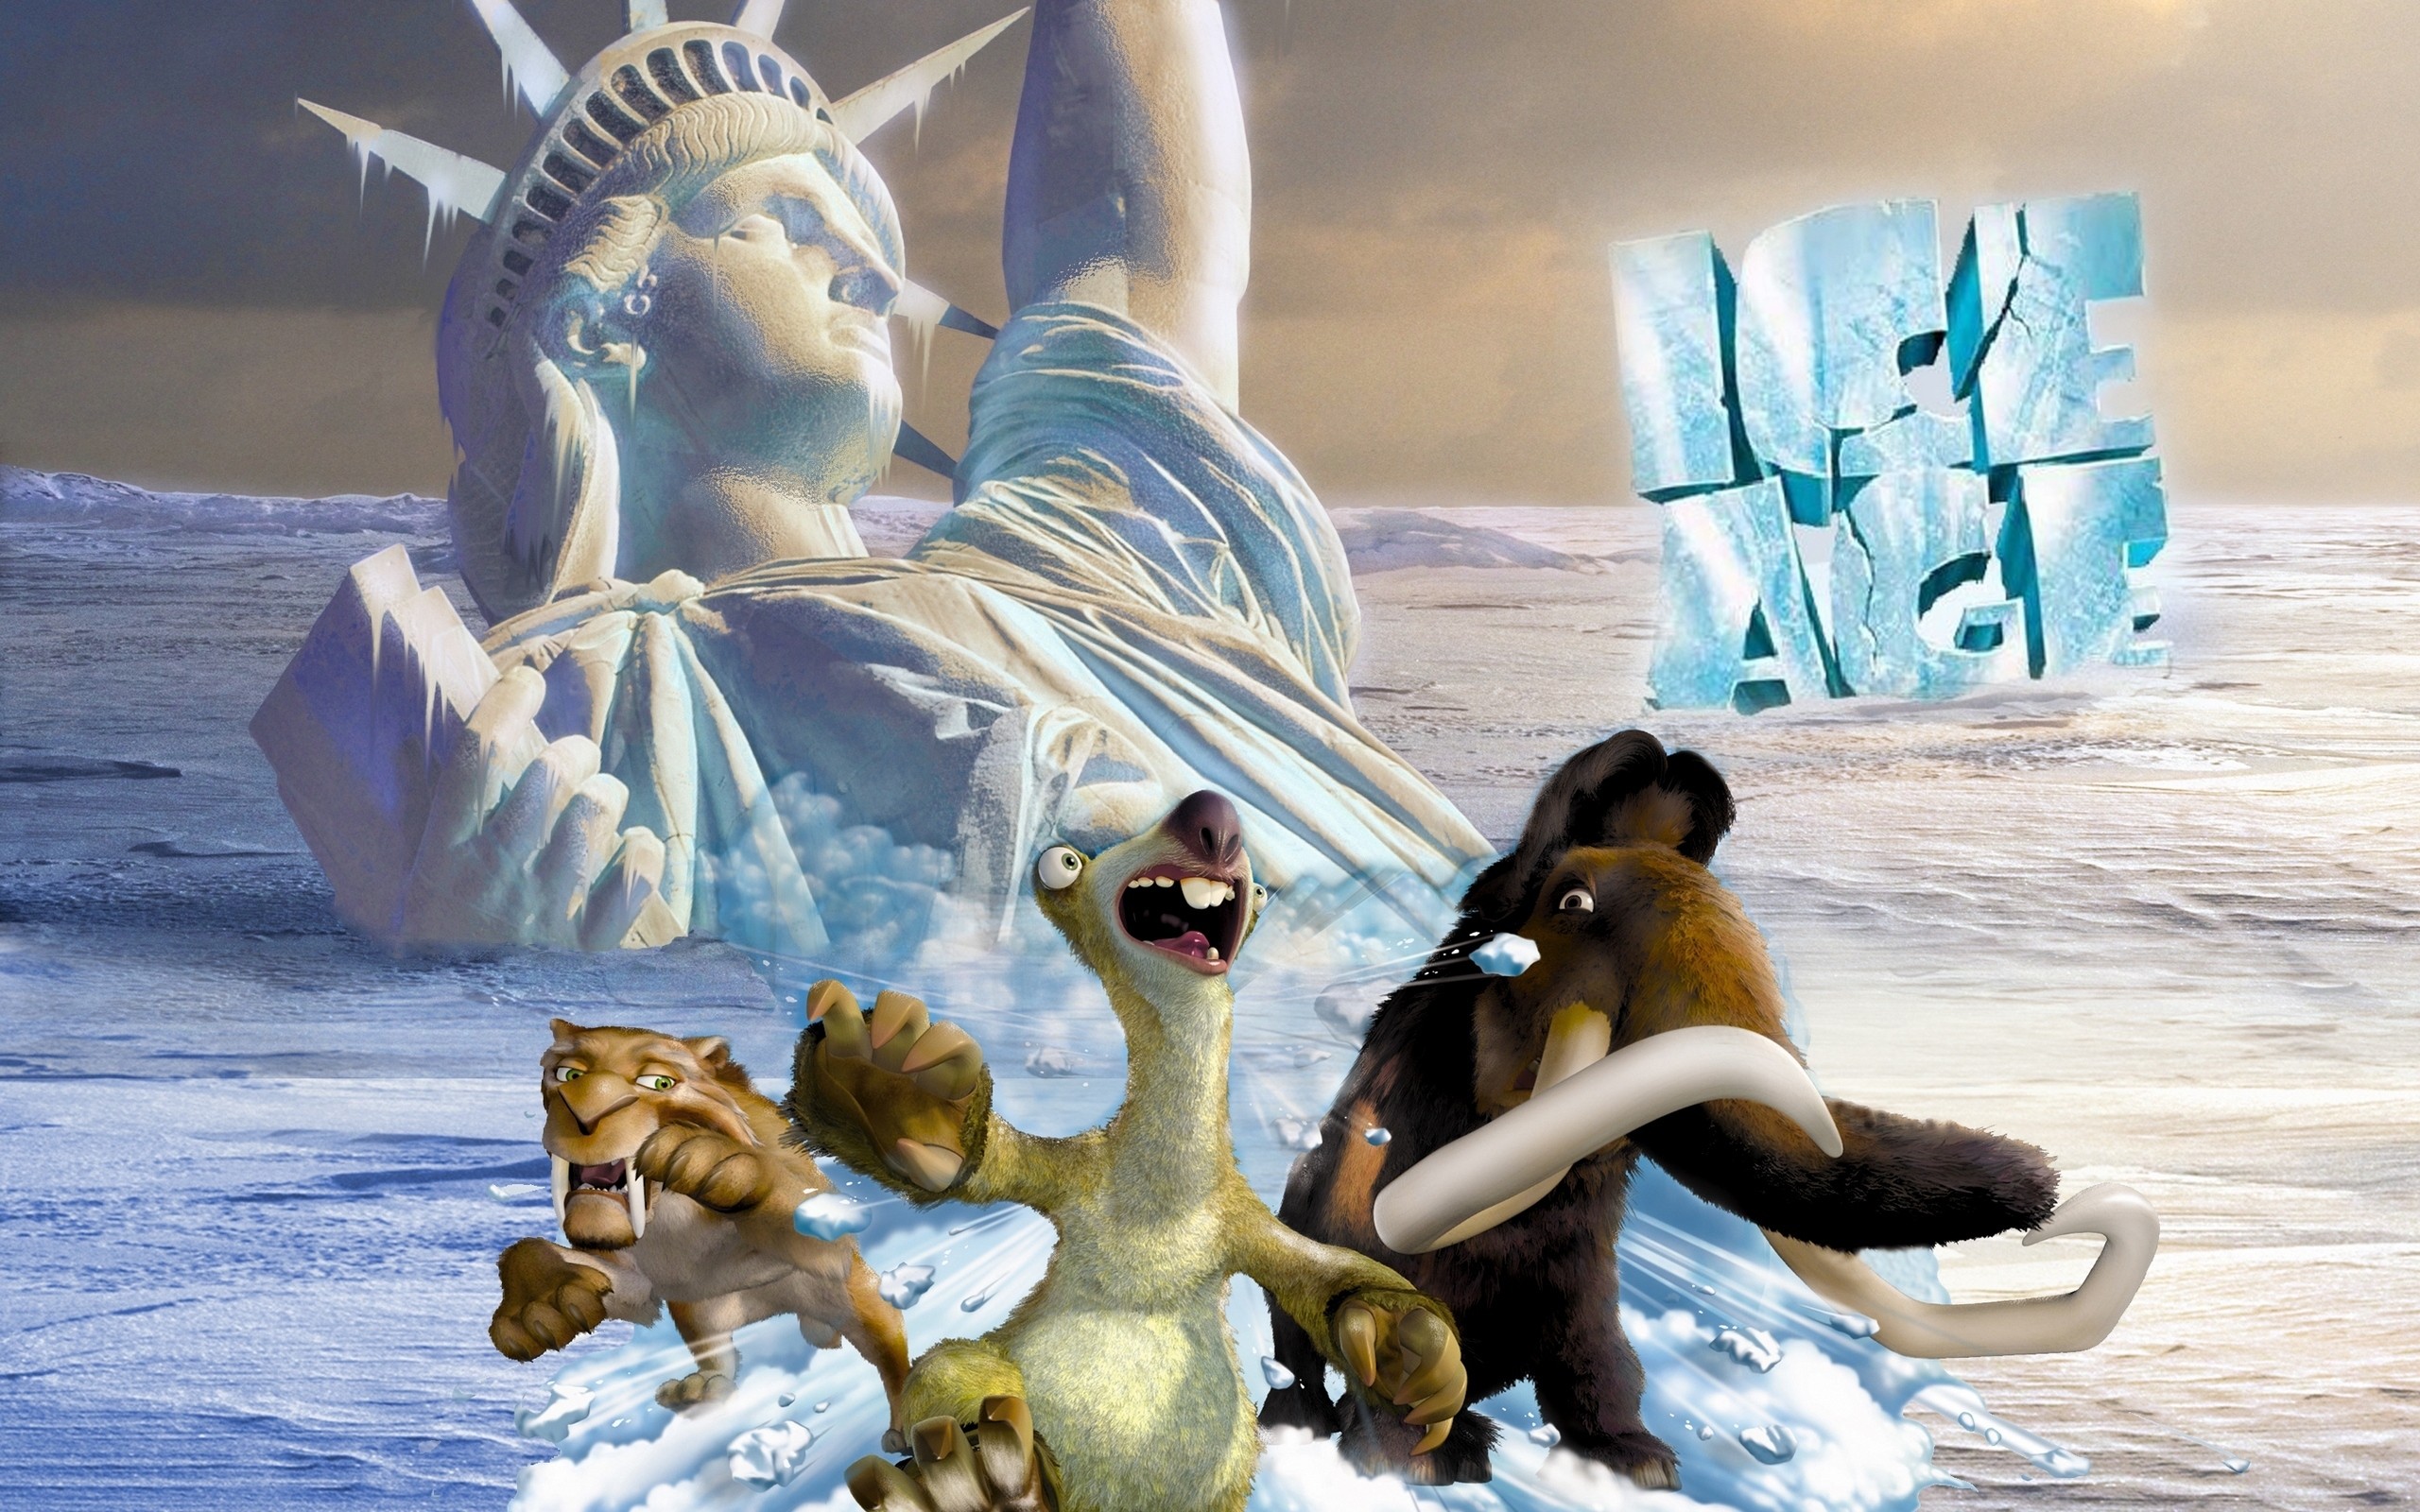 2560x1600 ice-age-hd-wallpapers-9 | Ice Age HD Wallpapers | Pinterest | Ice age, Hd  wallpaper and Wallpaper